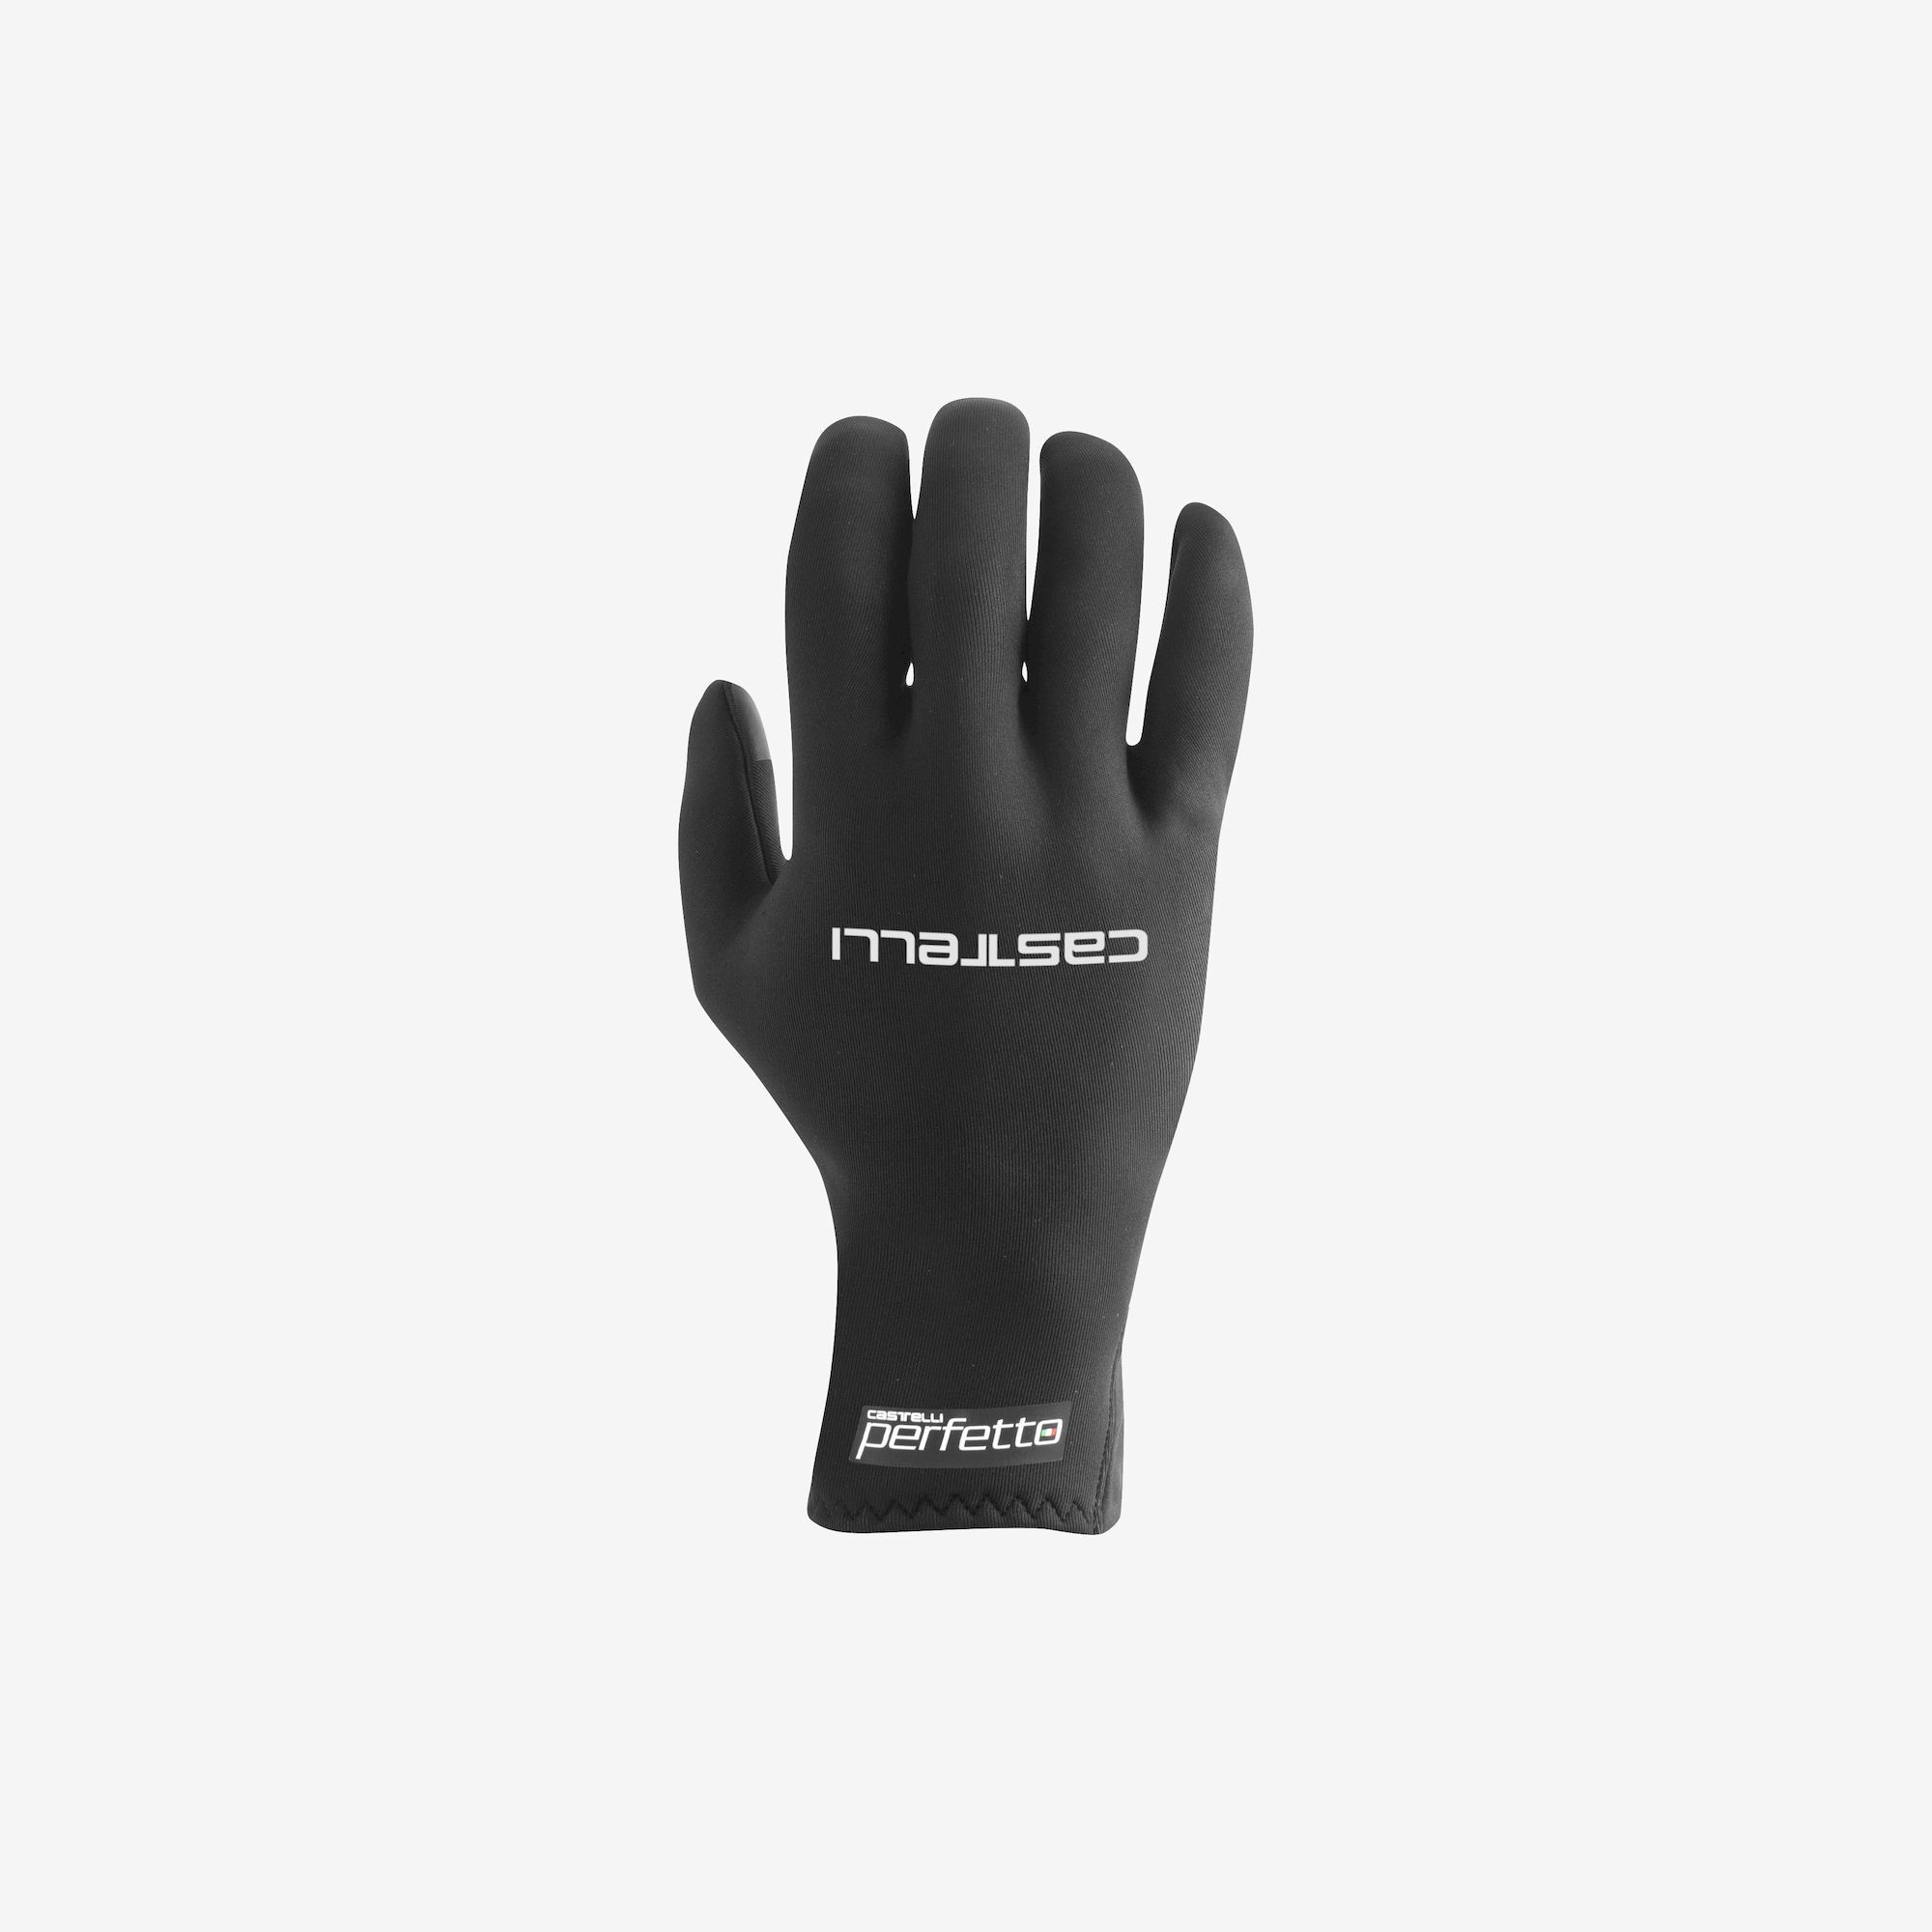 Castelli Perfetto Max Glove - Cycling gloves | Hardloop